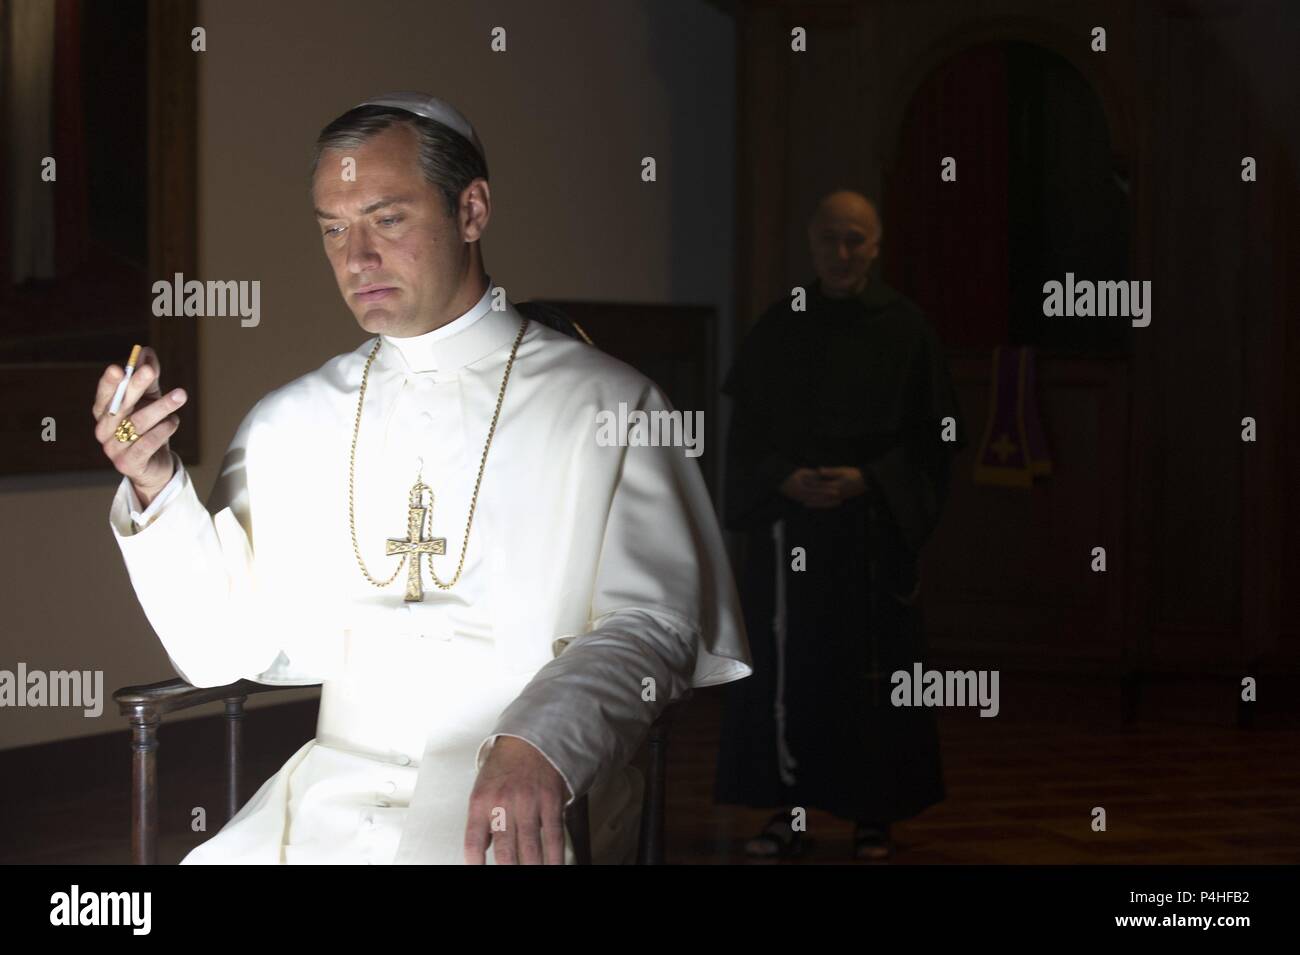 Original Film Title: THE YOUNG POPE. English Title: THE YOUNG POPE. Film  Director: PAOLO SORRENTINO. Year: 2016. Stars: JUDE LAW. Credit:  WILDSIDE/HAUT ET COURT TV/MEDIAPRO/HBO/SKY ITALIA/CANAL+ / Album Stock  Photo - Alamy